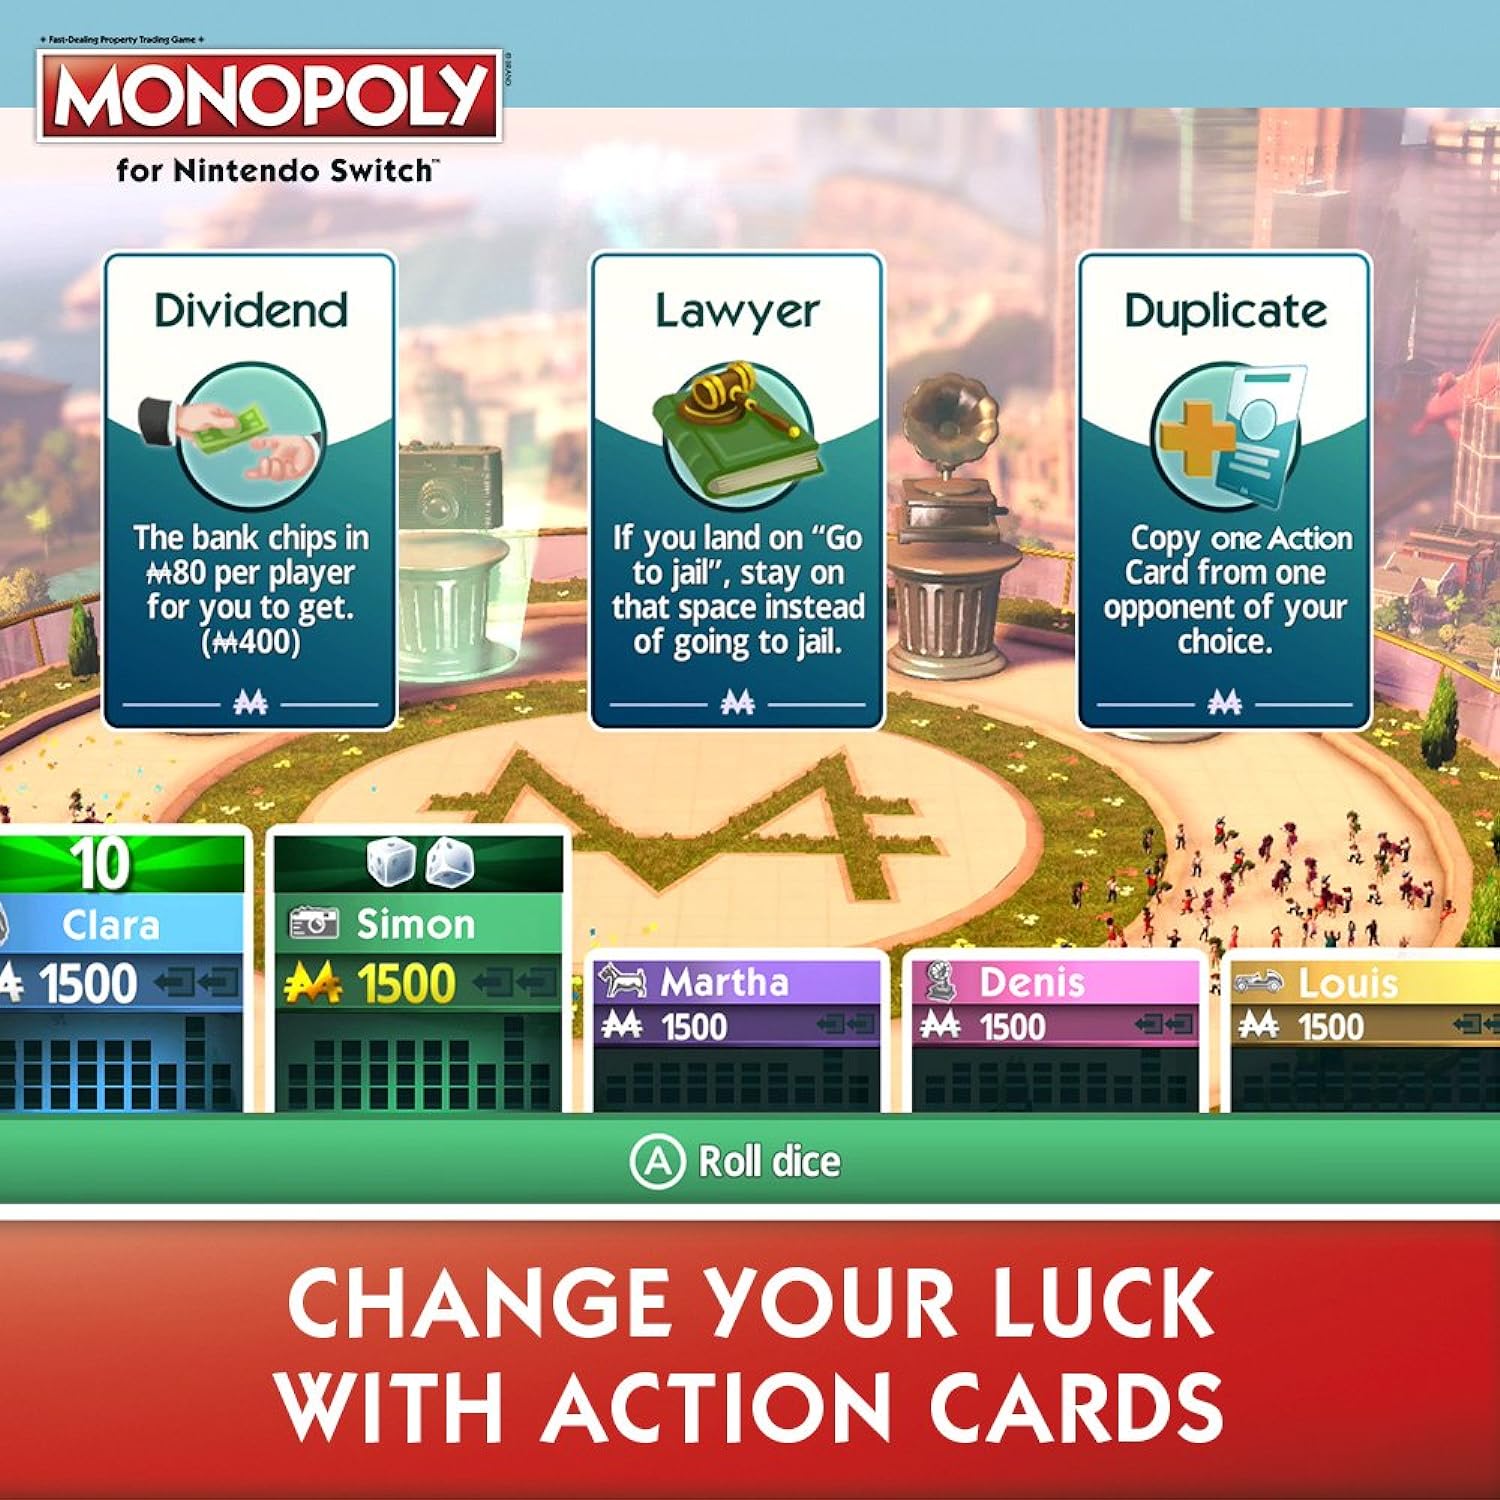 Nintendo NSW MONOPOLY FOR NINTENDO SWITCH (US) [video game] [video game]